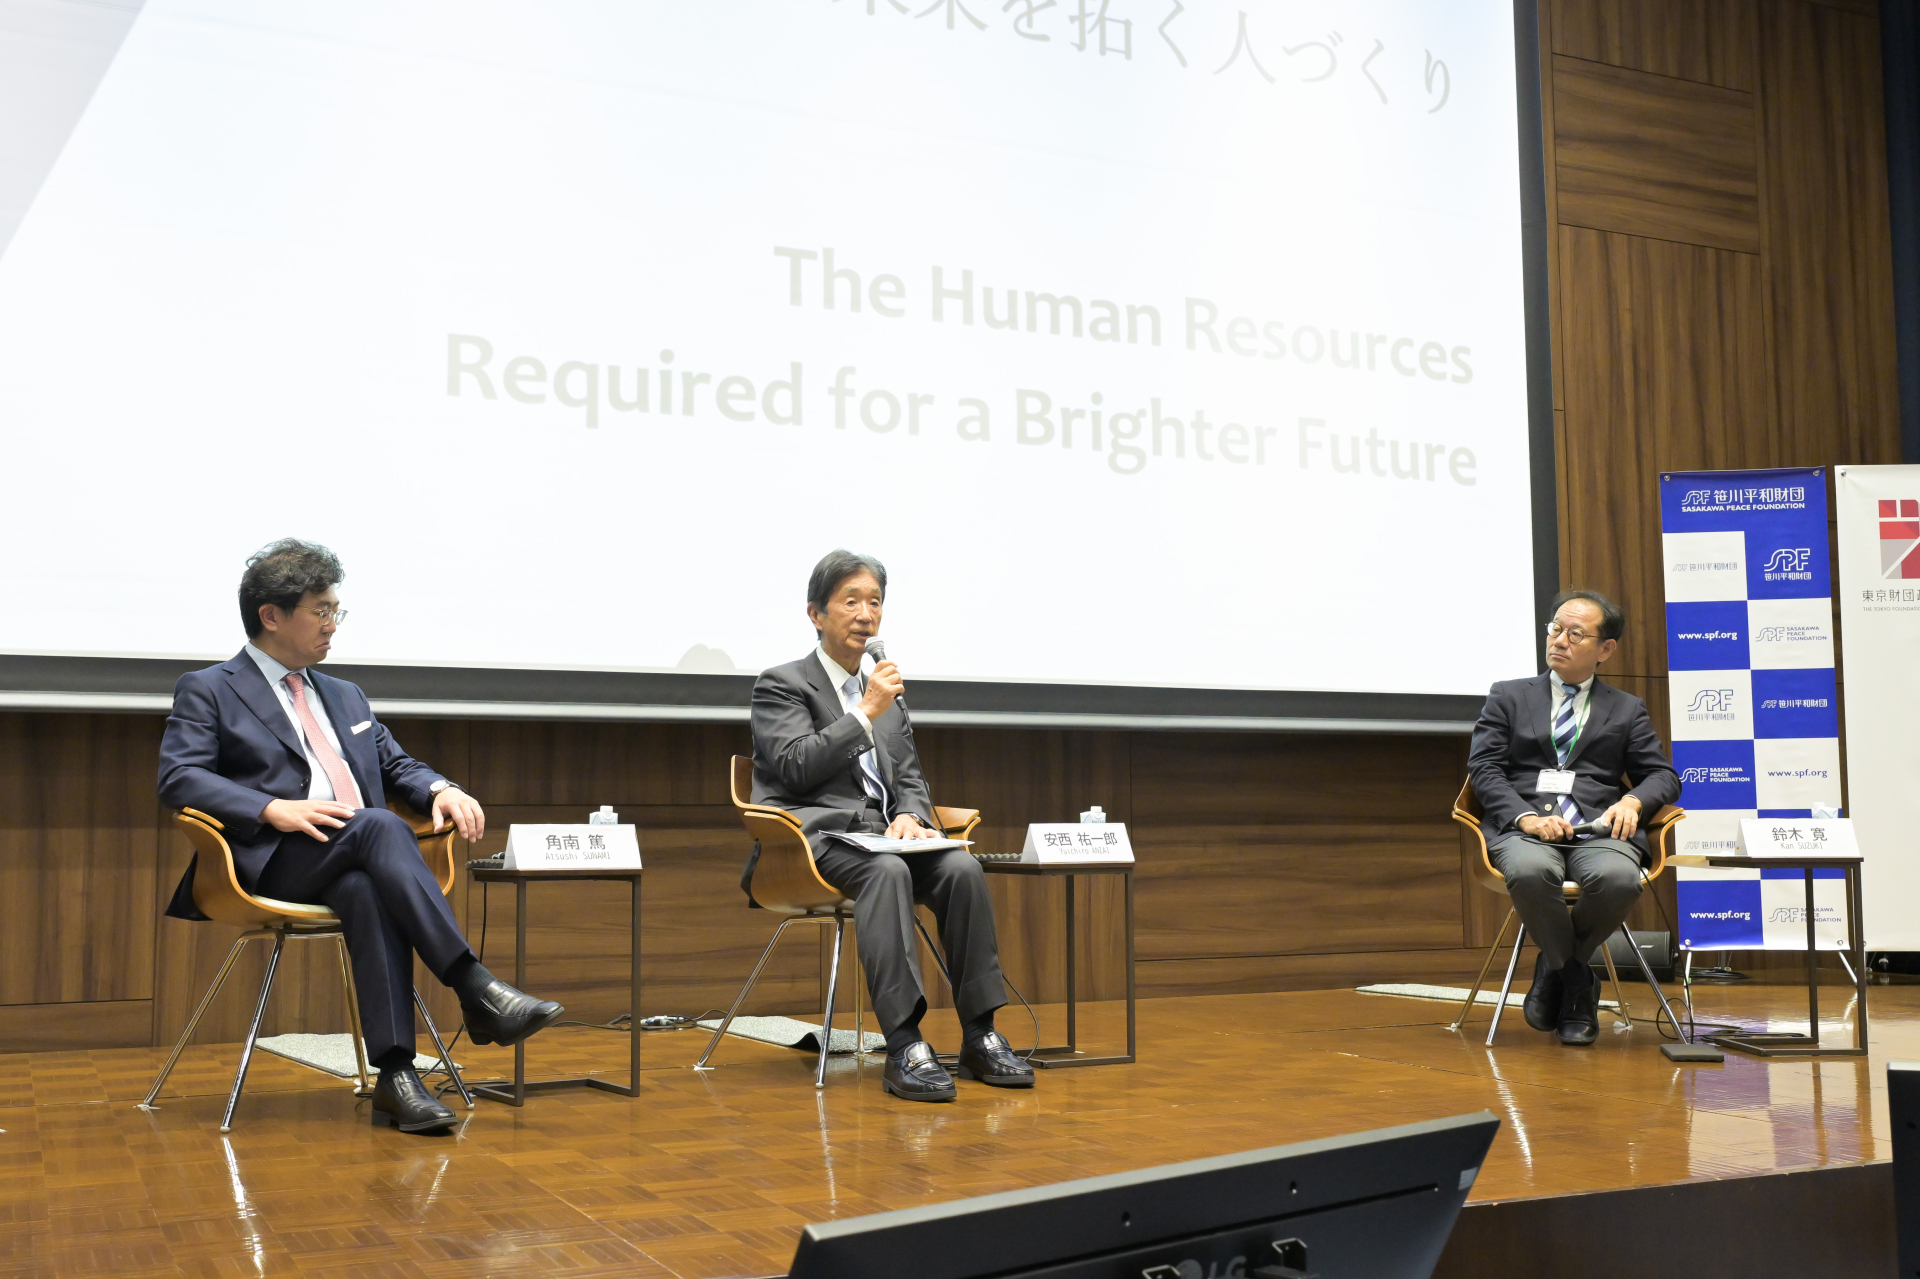 How Japan can meet global, domestic challenges and develop the human resources needed for a brighter future